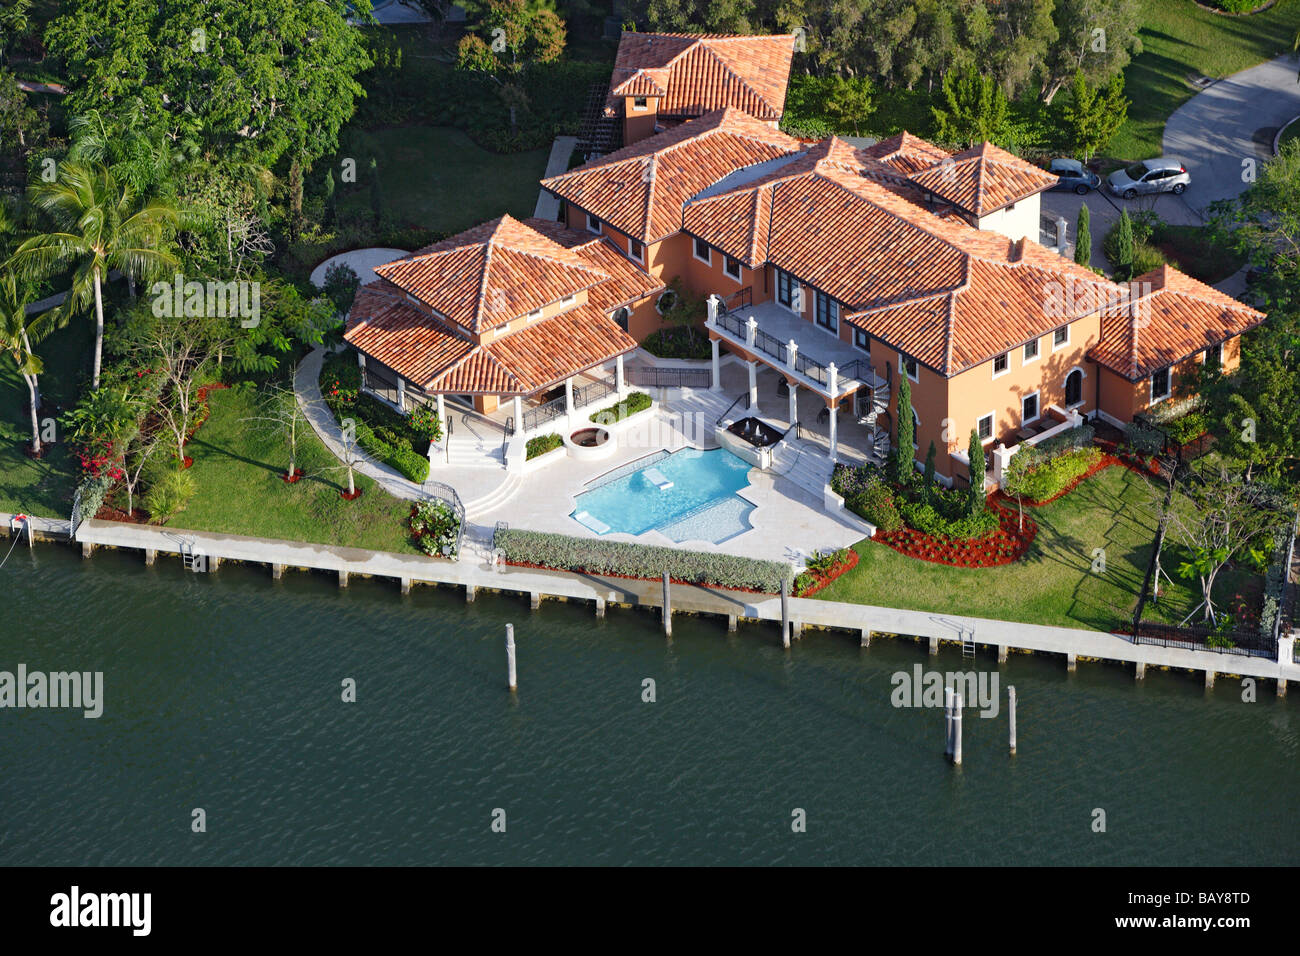 Luxurious homes in Coral Gables, Miami, Florida, United States of America, USA Stock Photo